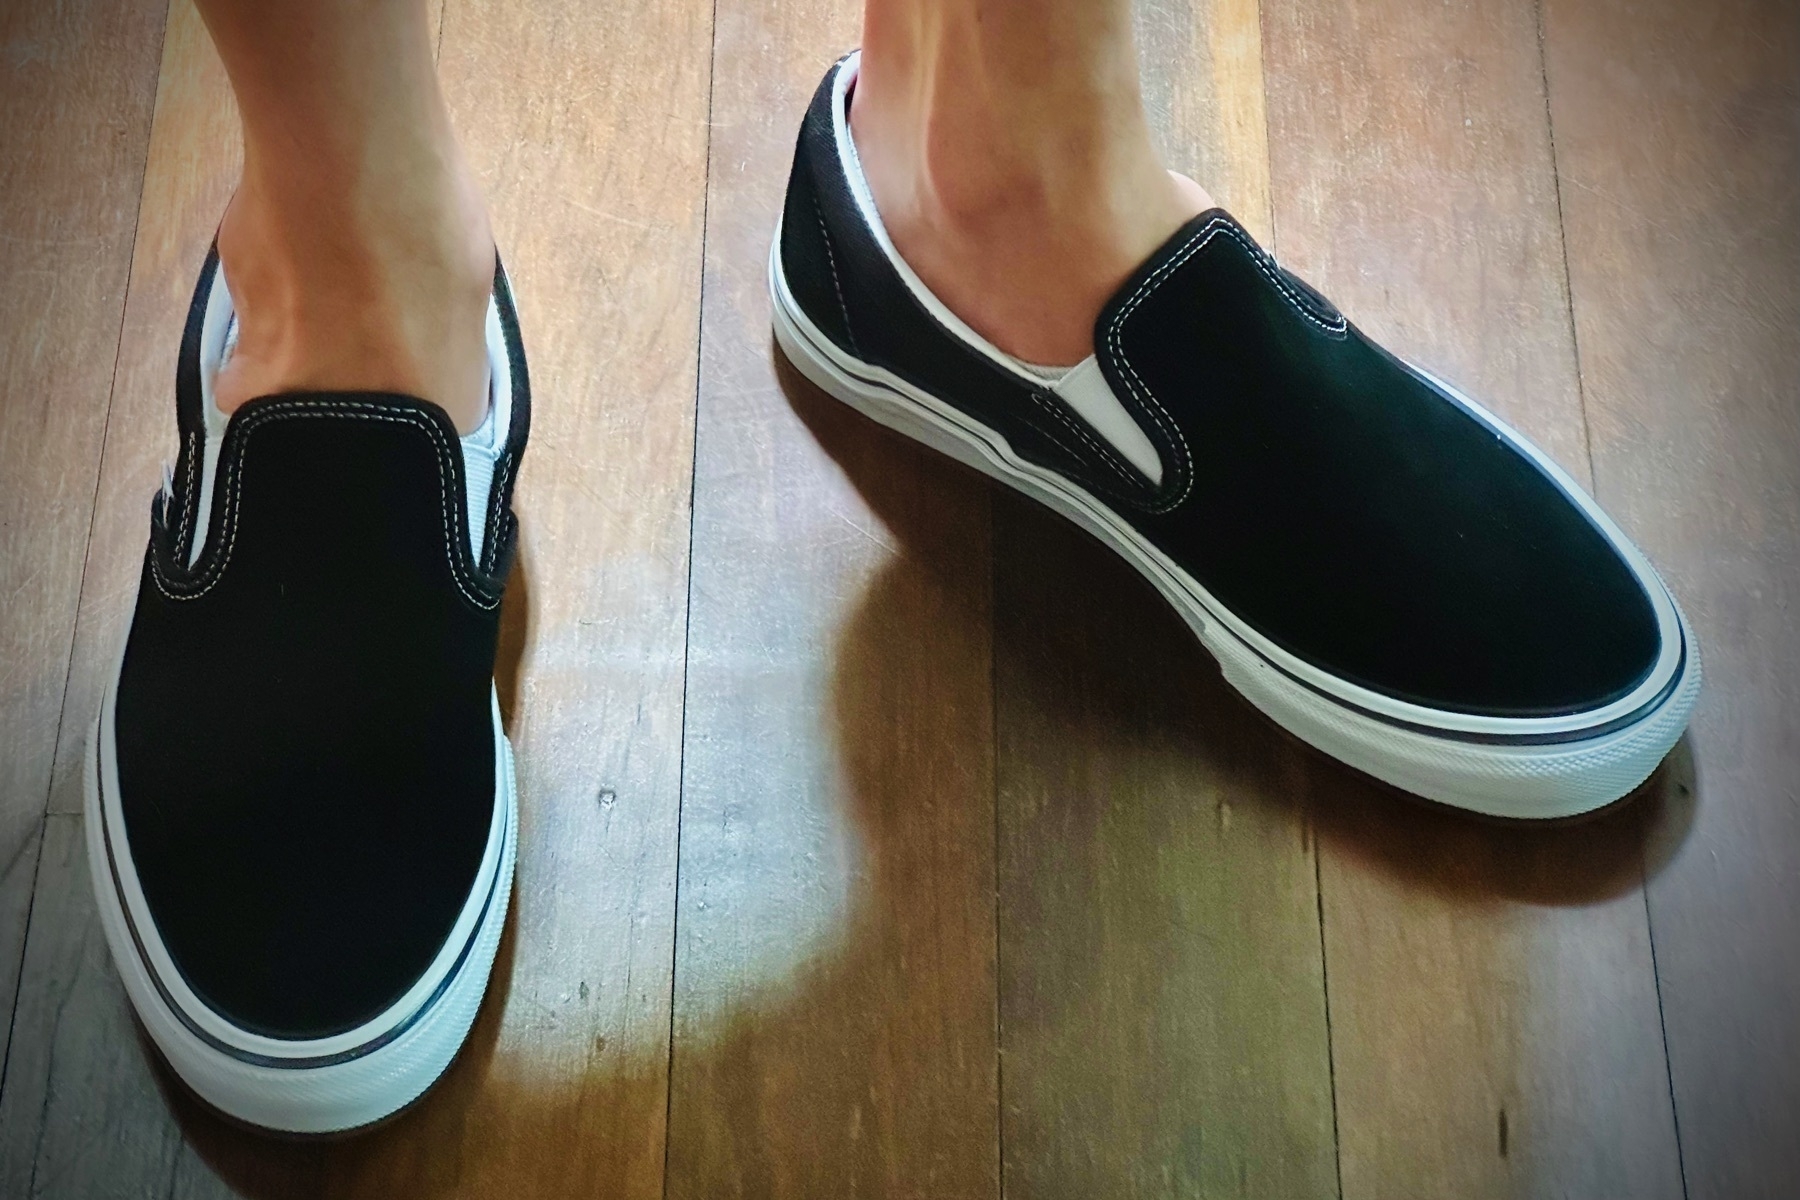 Close of ankles and feet in Vans Skate Sip-on Pro kicks, invisible socks, on a dark polished wood floor.